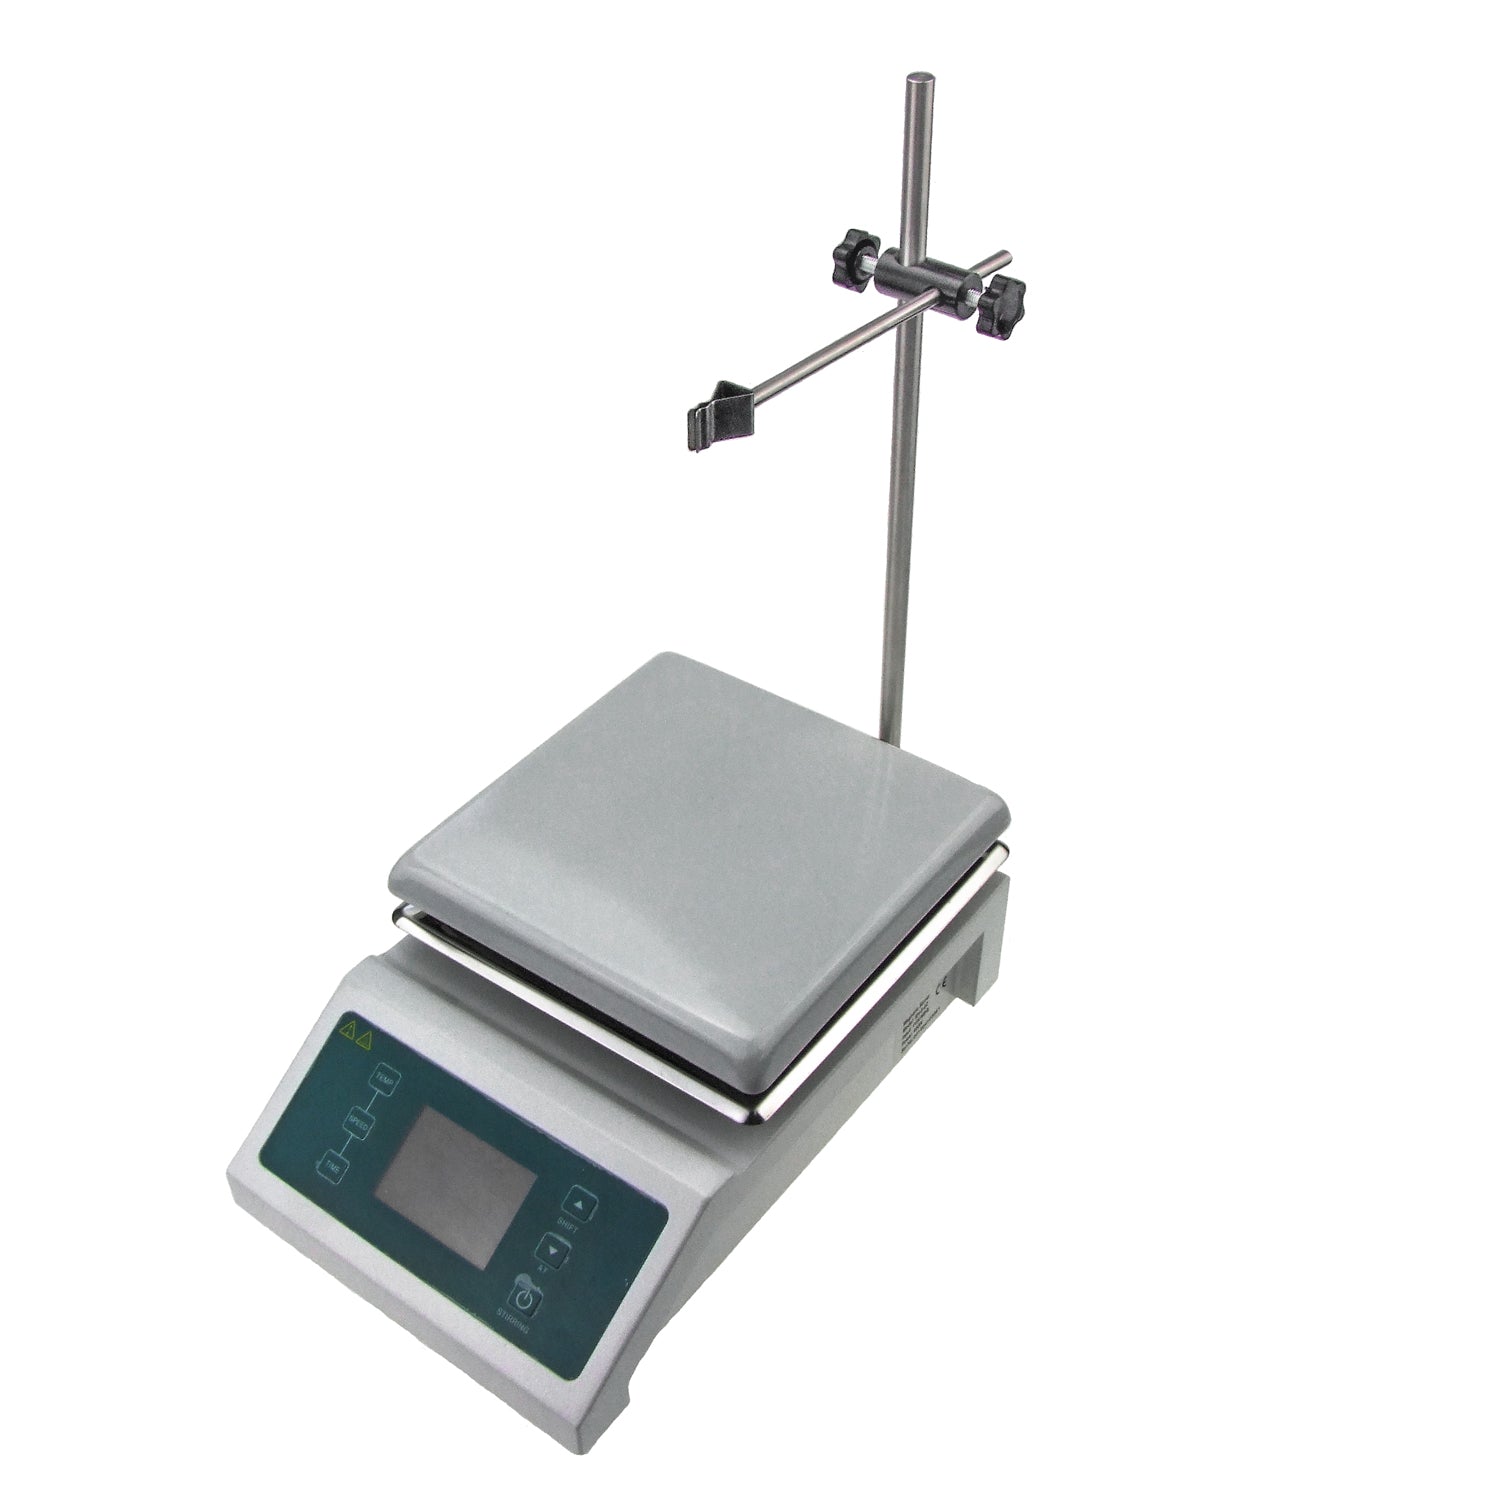 Hardware Factory Store Inc - Magnetic Stirrer w/ Hot Plate - 600w heating